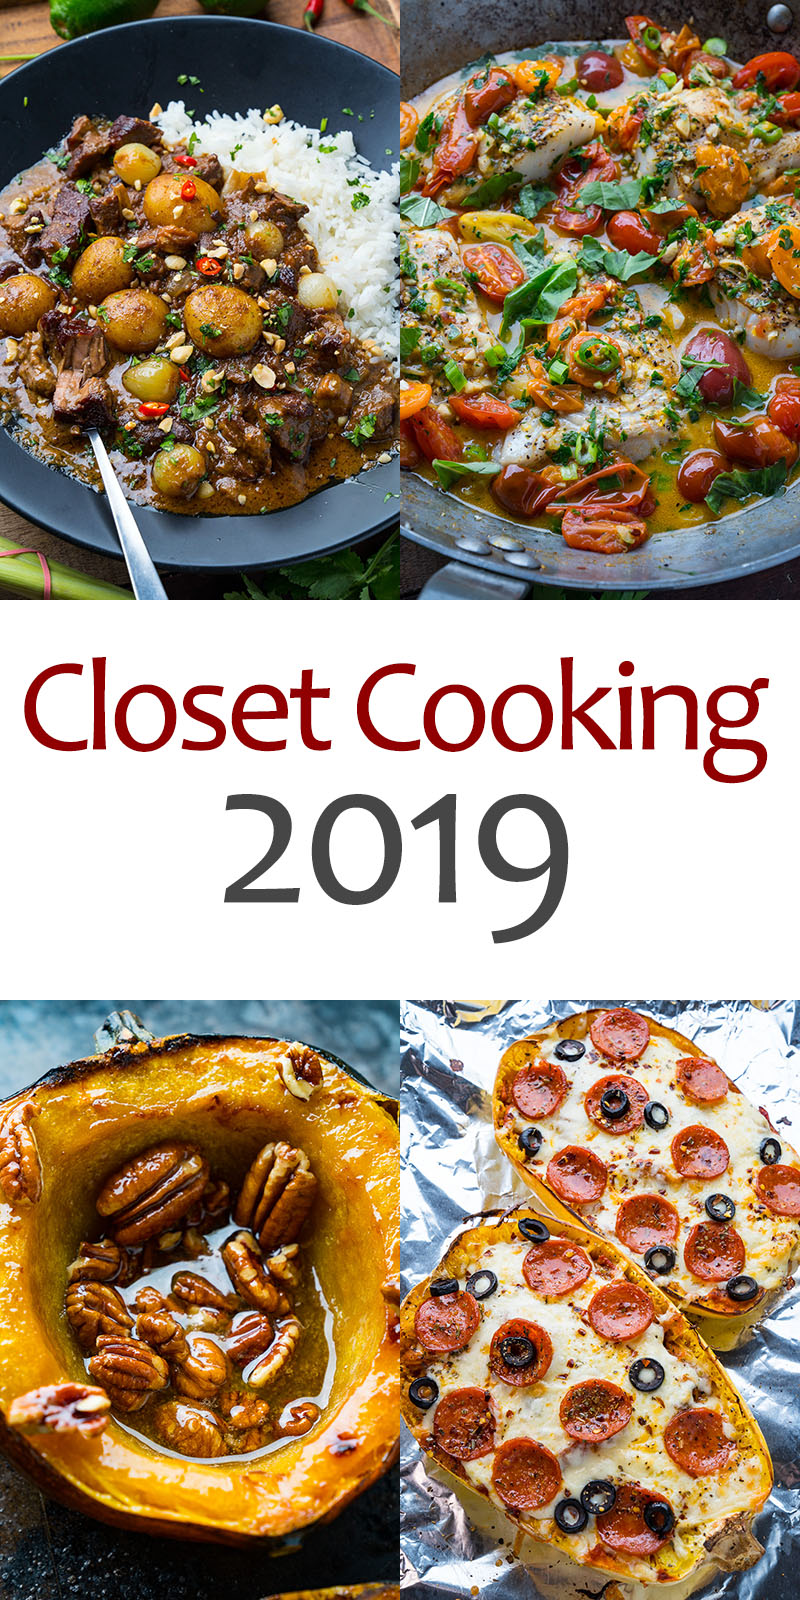 My Favourite Recipes of 2019